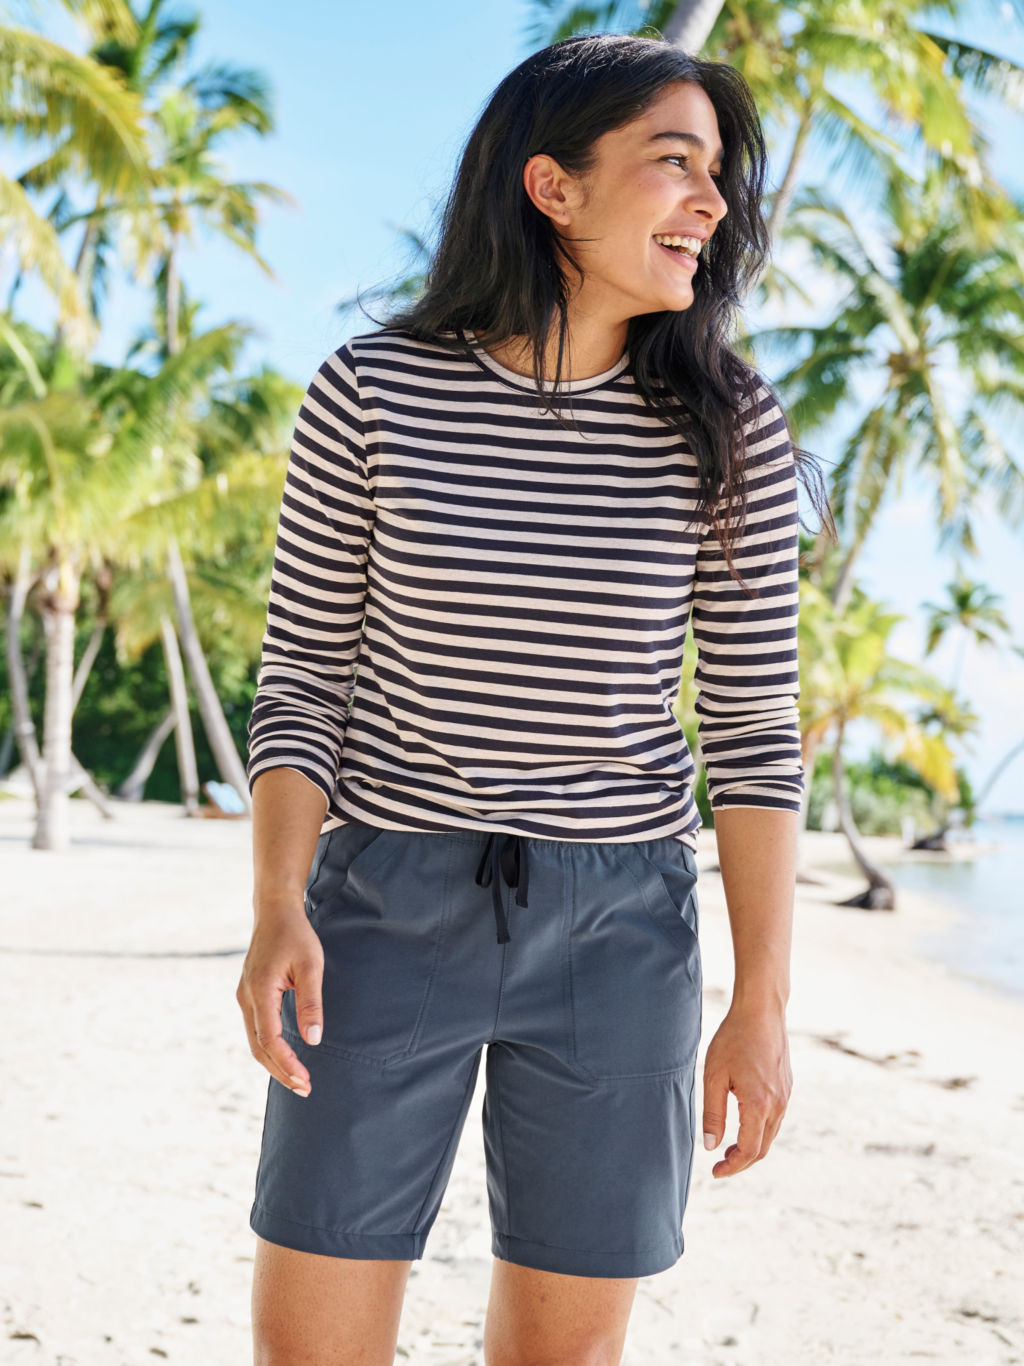 A woman with dark hair wearing a navy and white striped t-shirt and lightweight navy colored shorts standing on a beach.